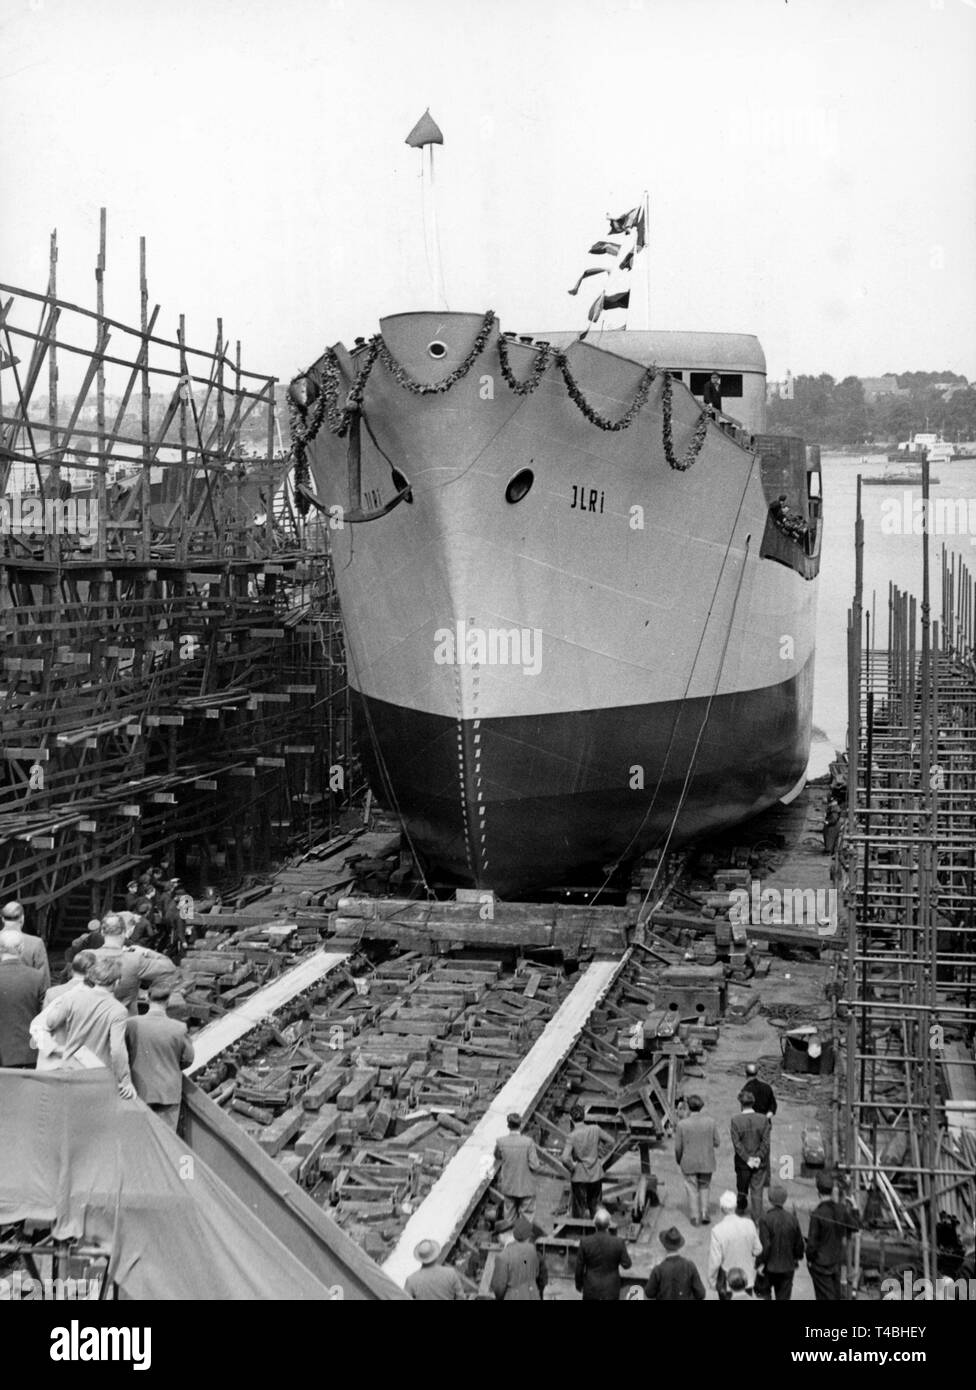 A 999 GRT heavy cargo ship is launched at the Neptun dockyard in Rostock, GDR, 26 July 1958. The ship with solidly welded hulk was bought by Hamburg-based shipowning company Basthold Richters and is the first on six build by Neptun. | usage worldwide Stock Photo